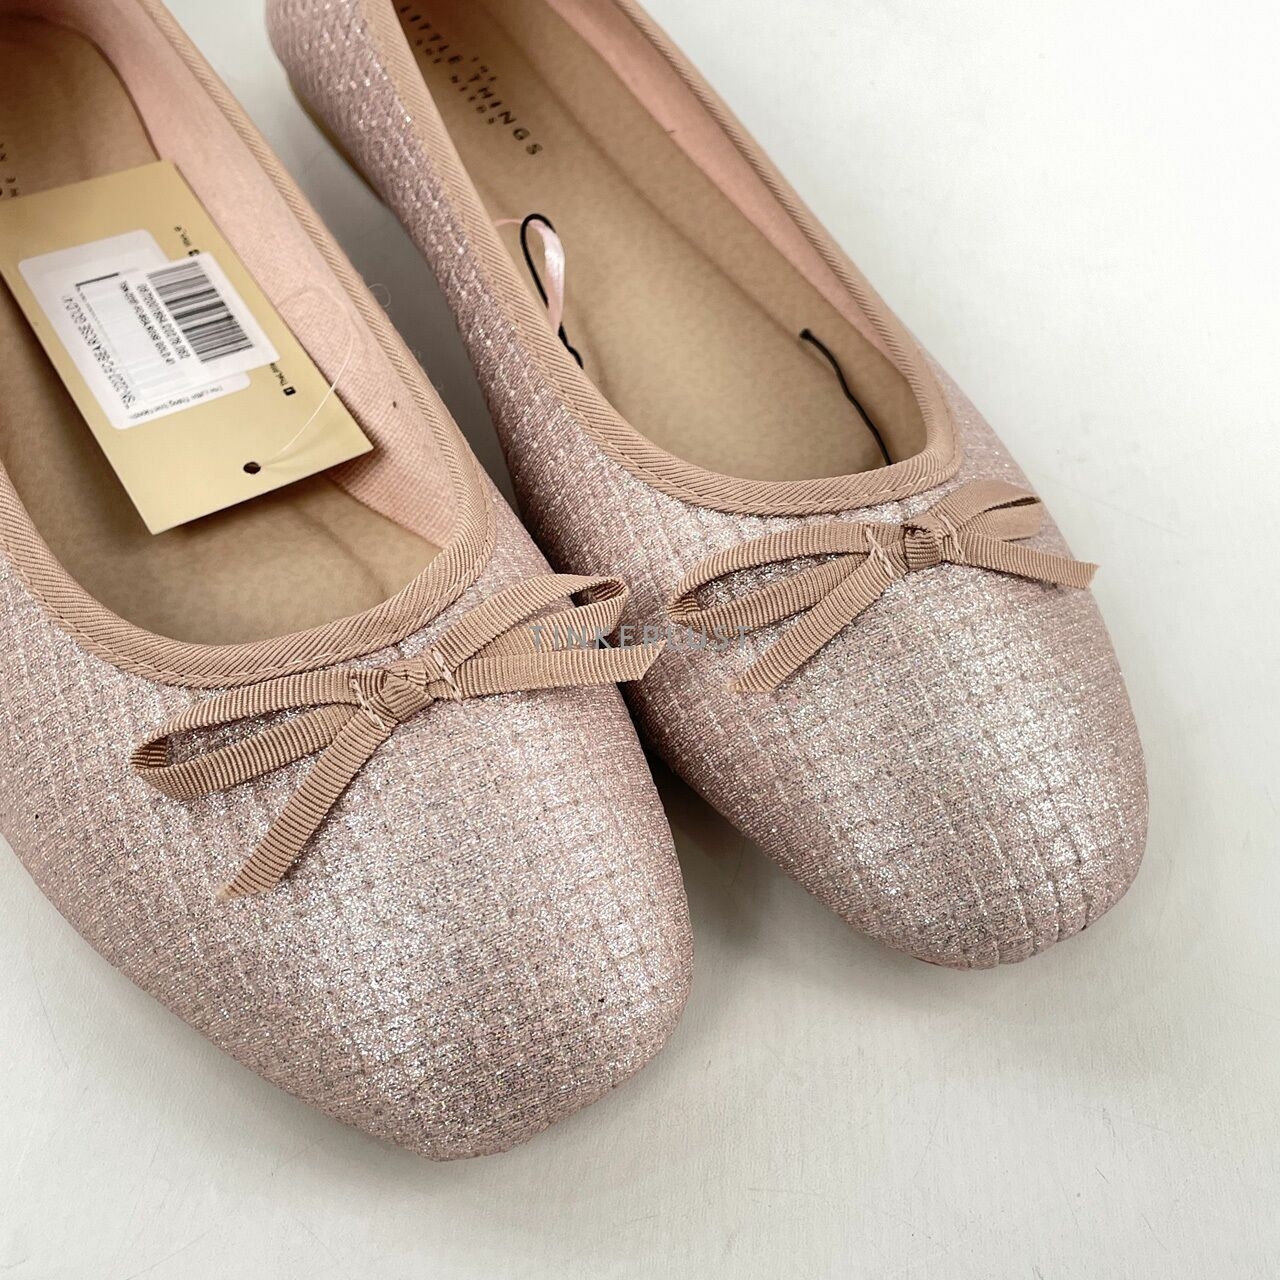 The Little Things She Needs Rose Gold Glitter Flats